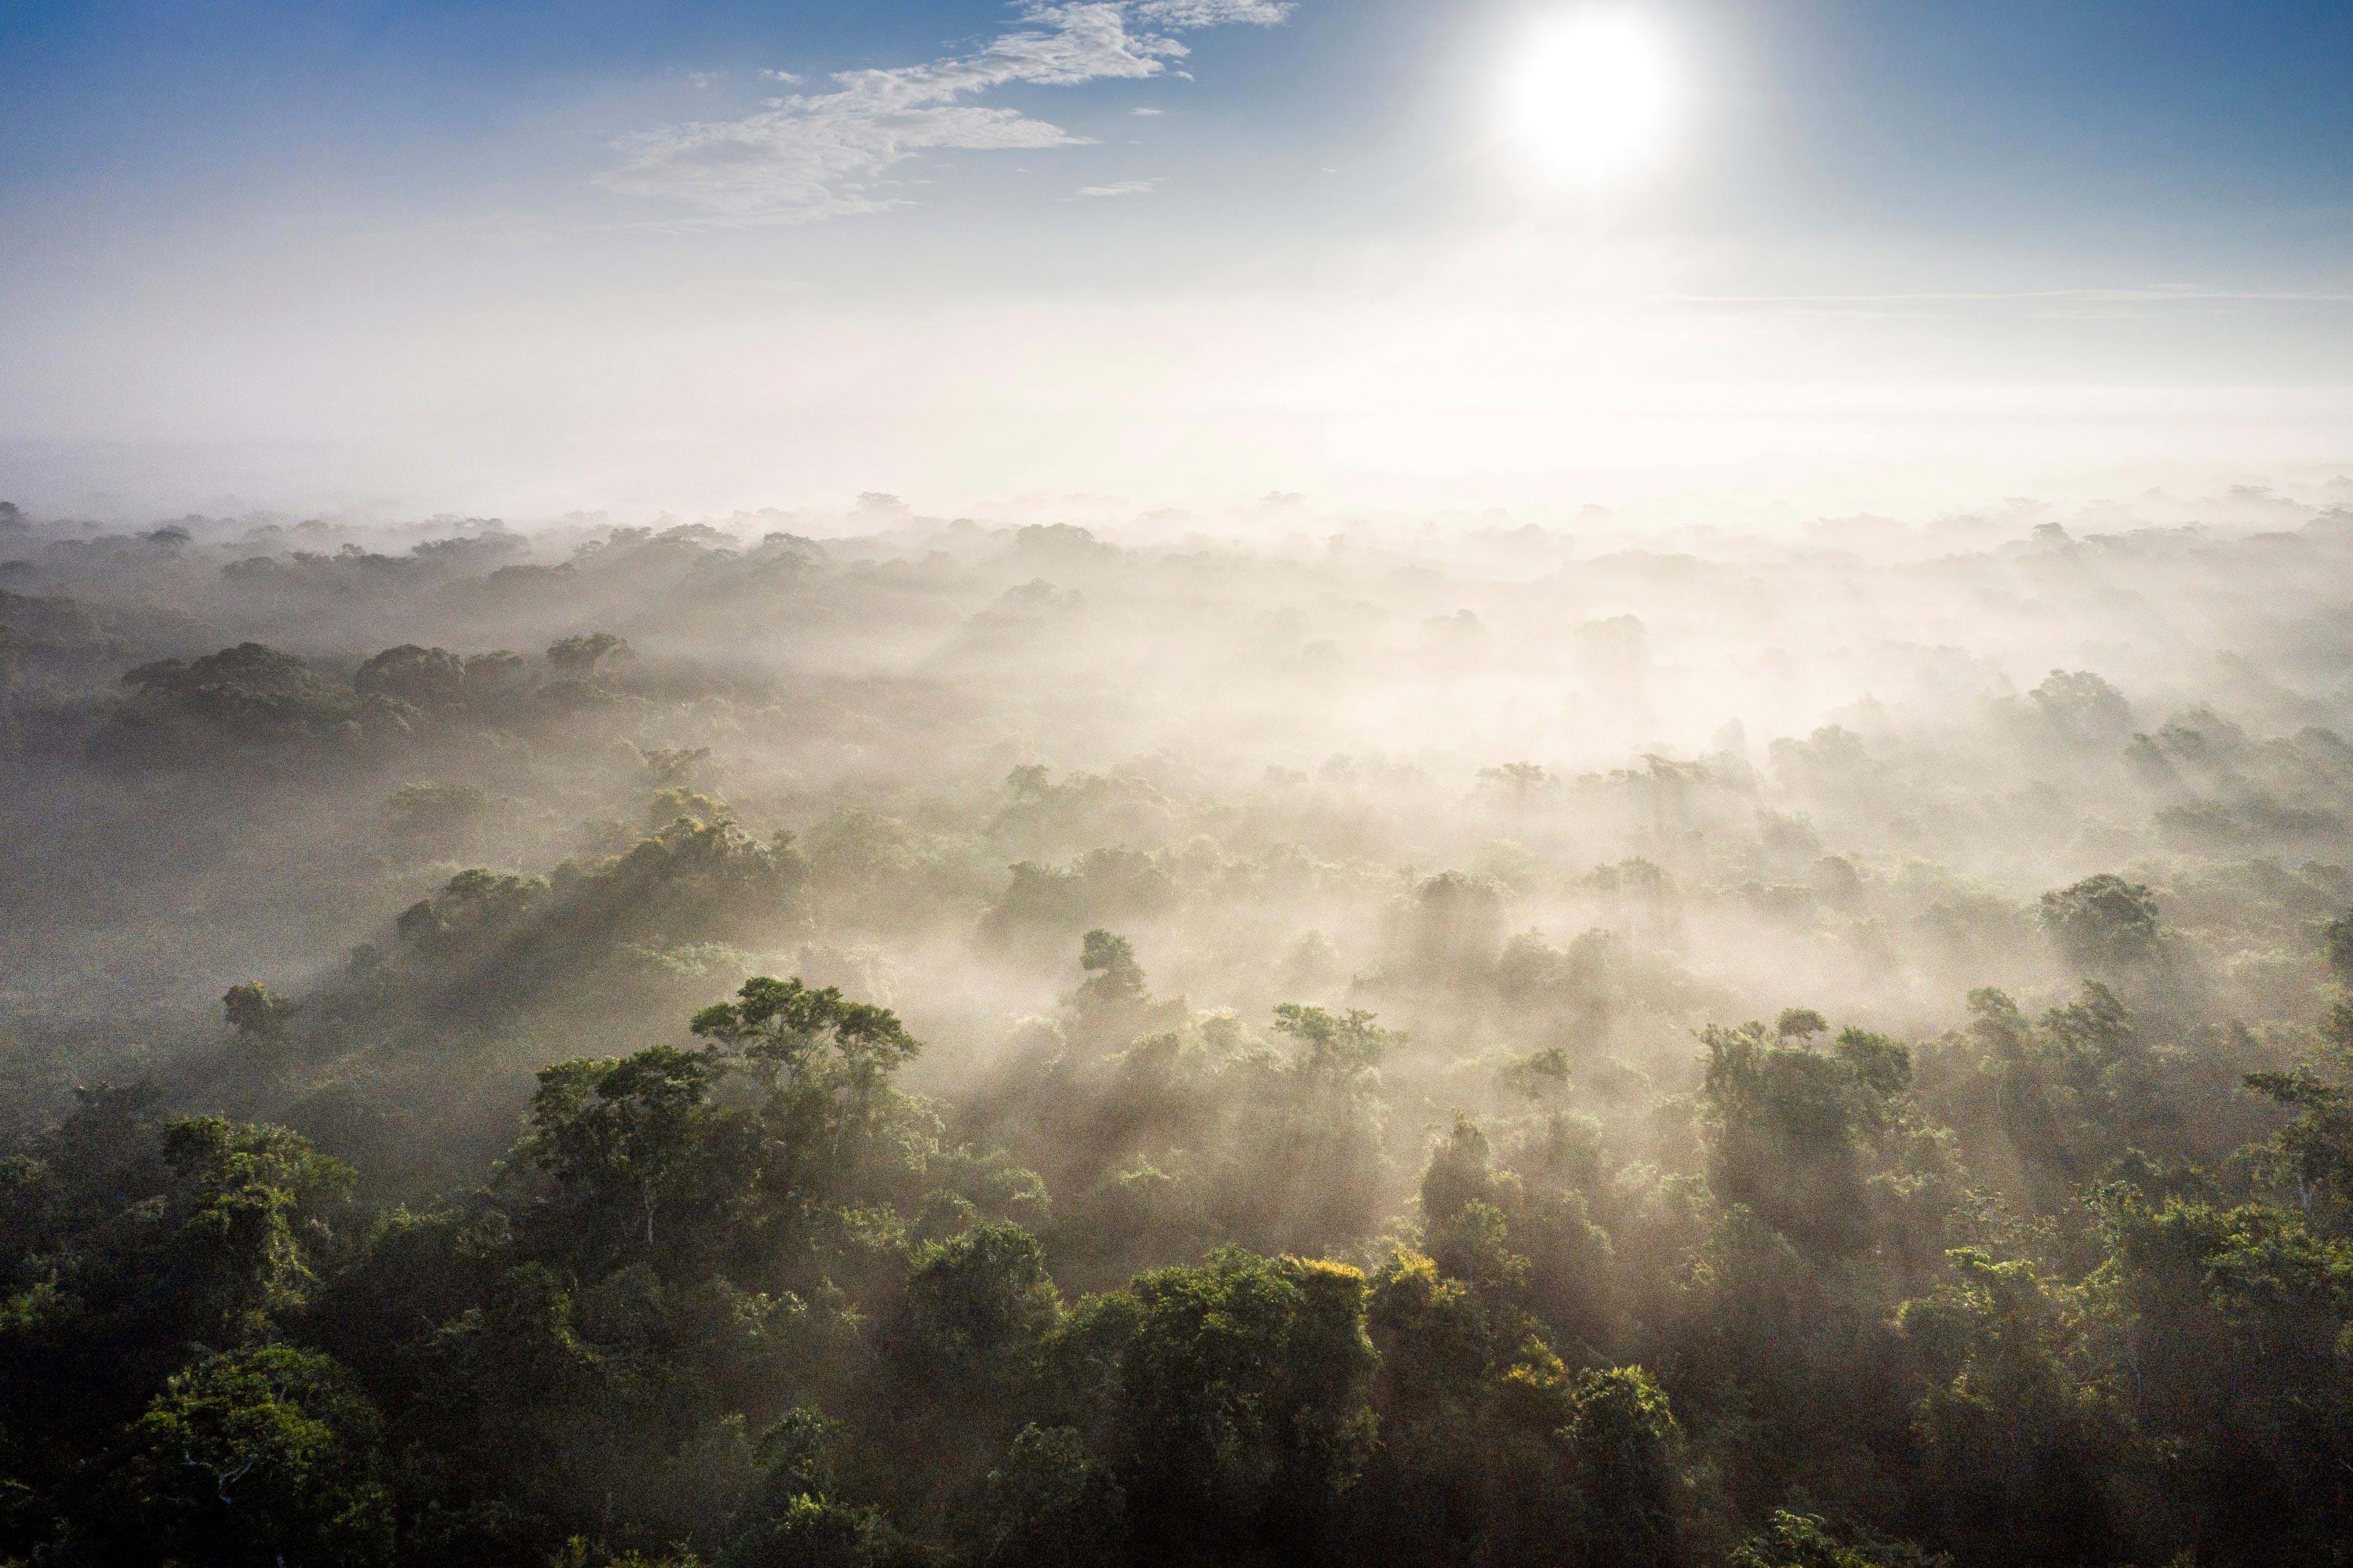 Tree tops and the sun streaming through the clouds can be seen in an aerial view of the Maya Biosphere Reserve.